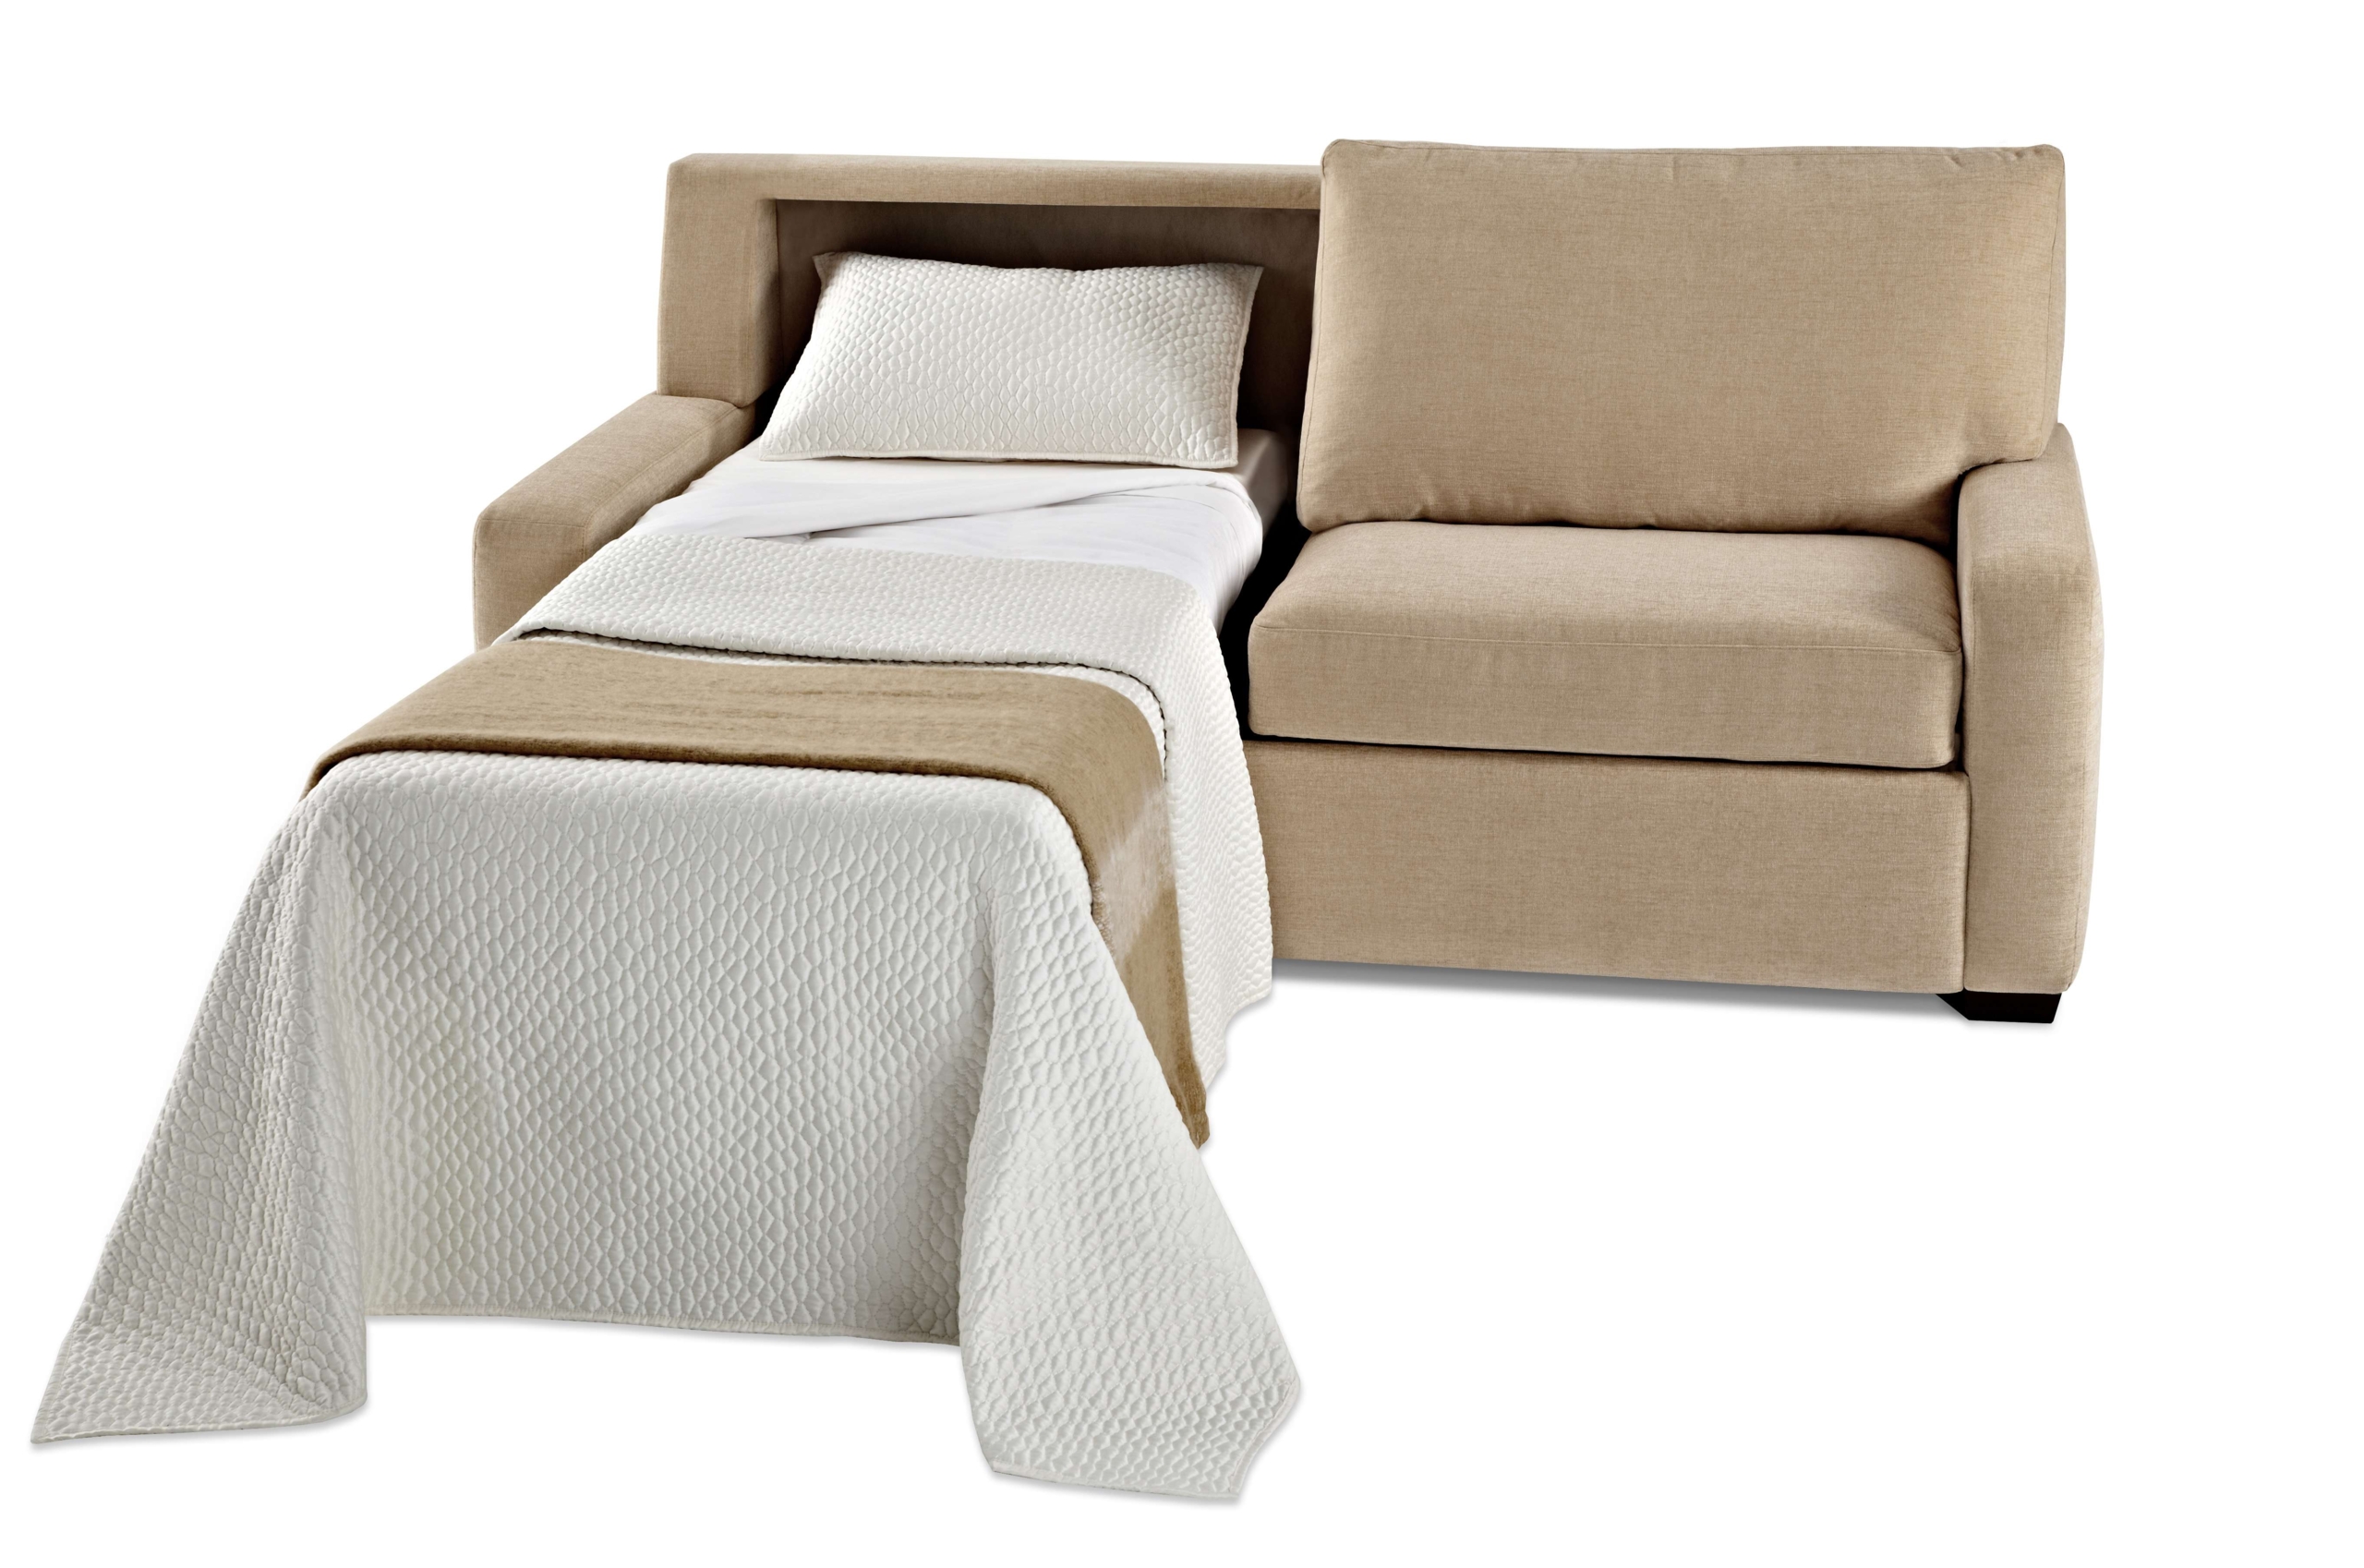 Loveseat Twin Sleeper Sofa Visualhunt, Twin Bed Fold Out Couch